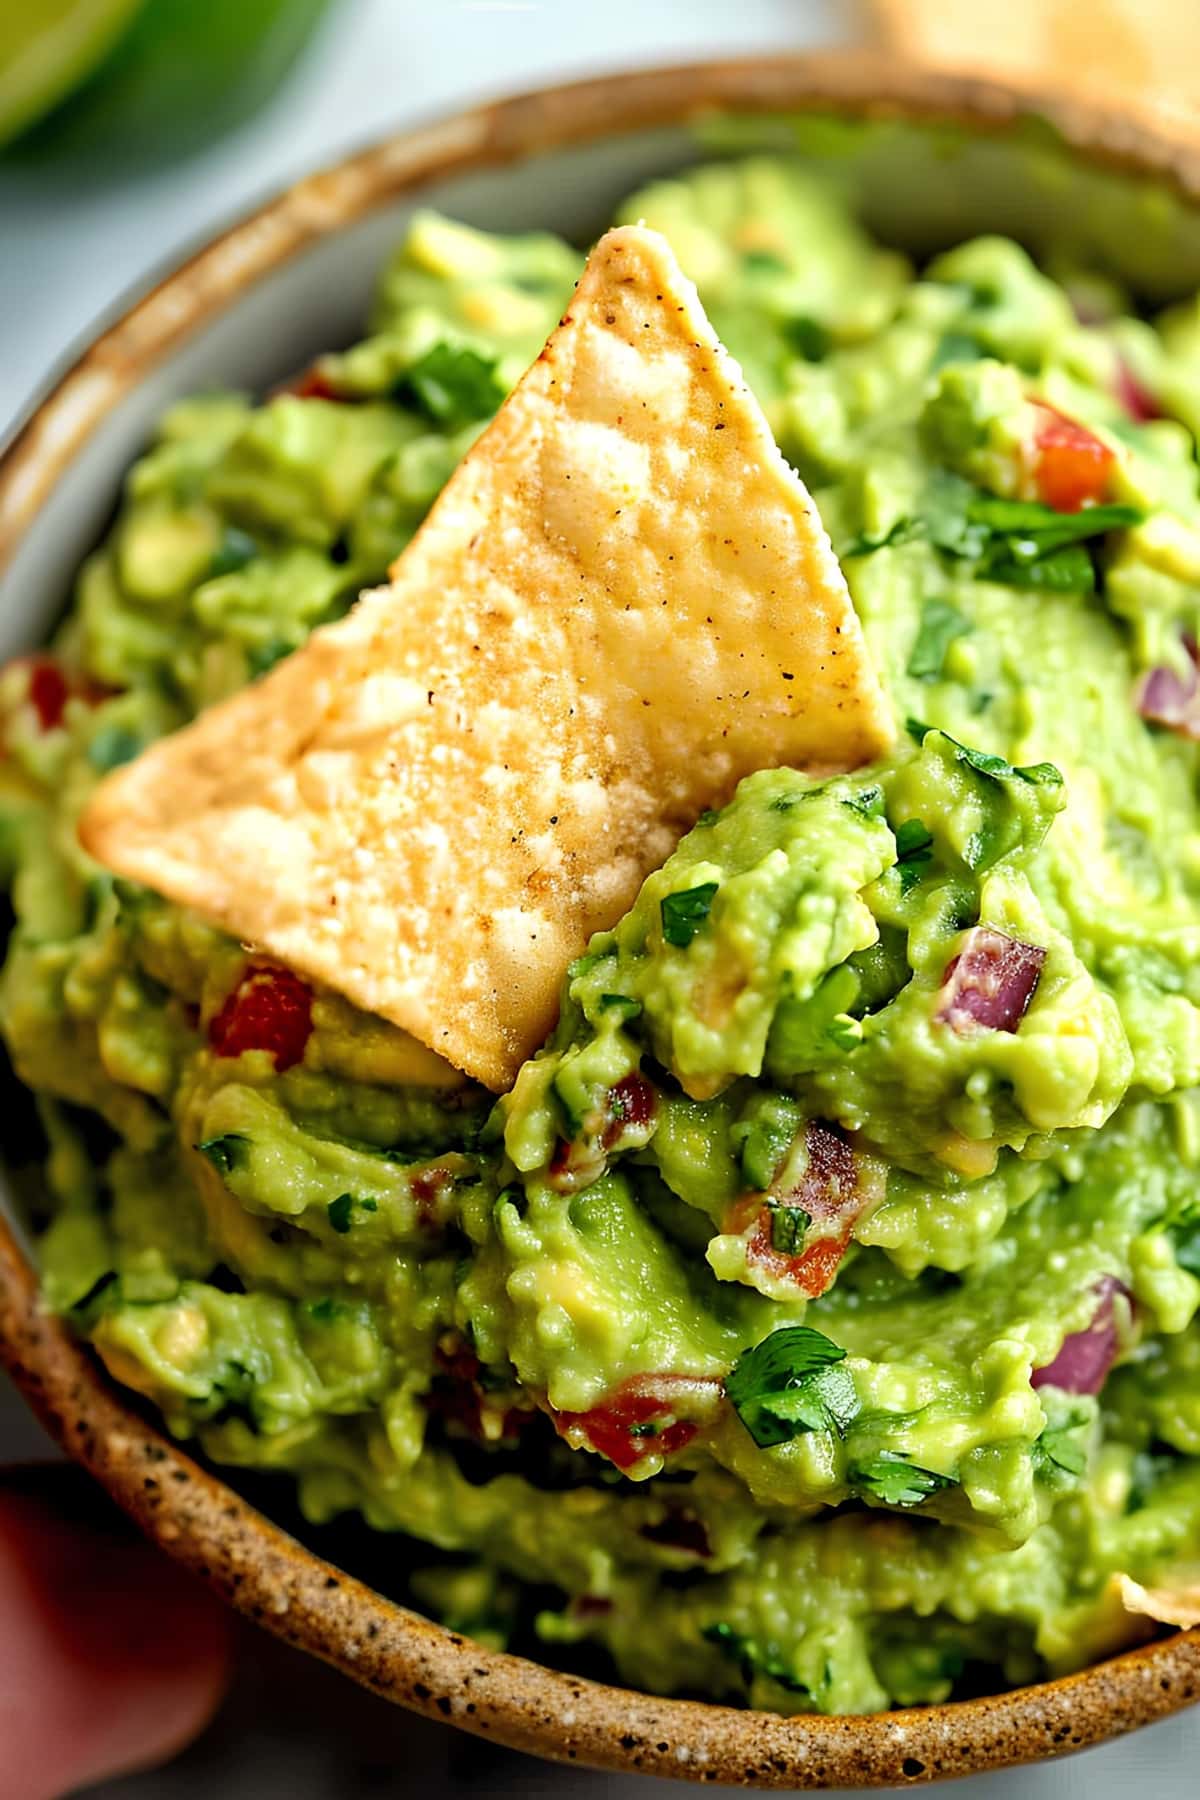 A bowl of guacamole with tortilla chips, perfect for dipping, top view